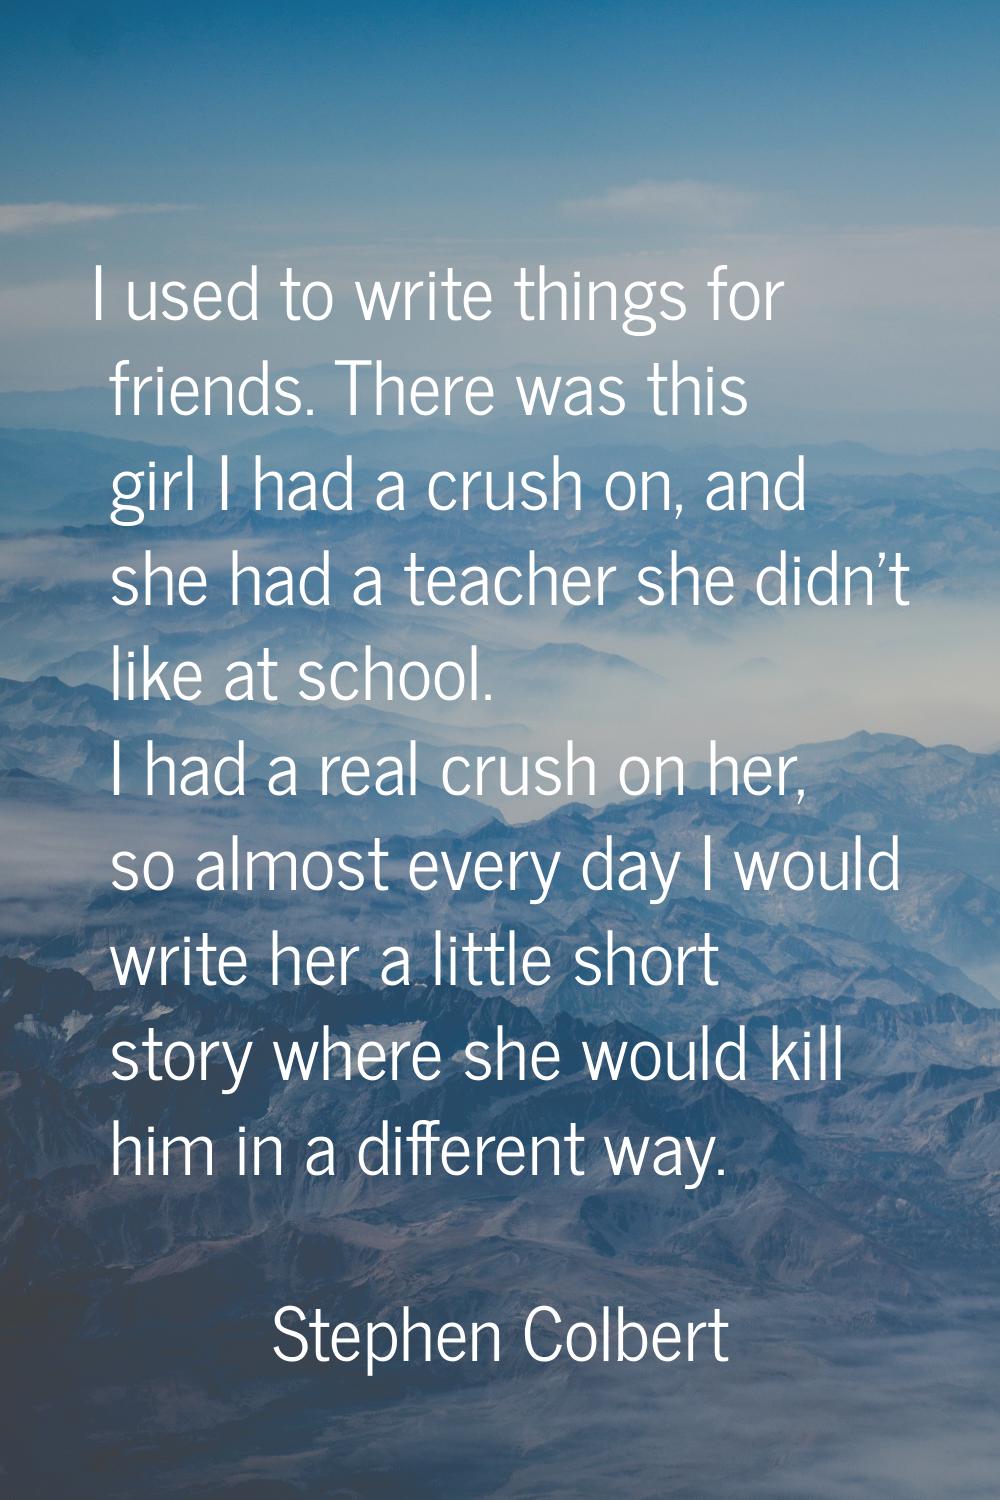 I used to write things for friends. There was this girl I had a crush on, and she had a teacher she